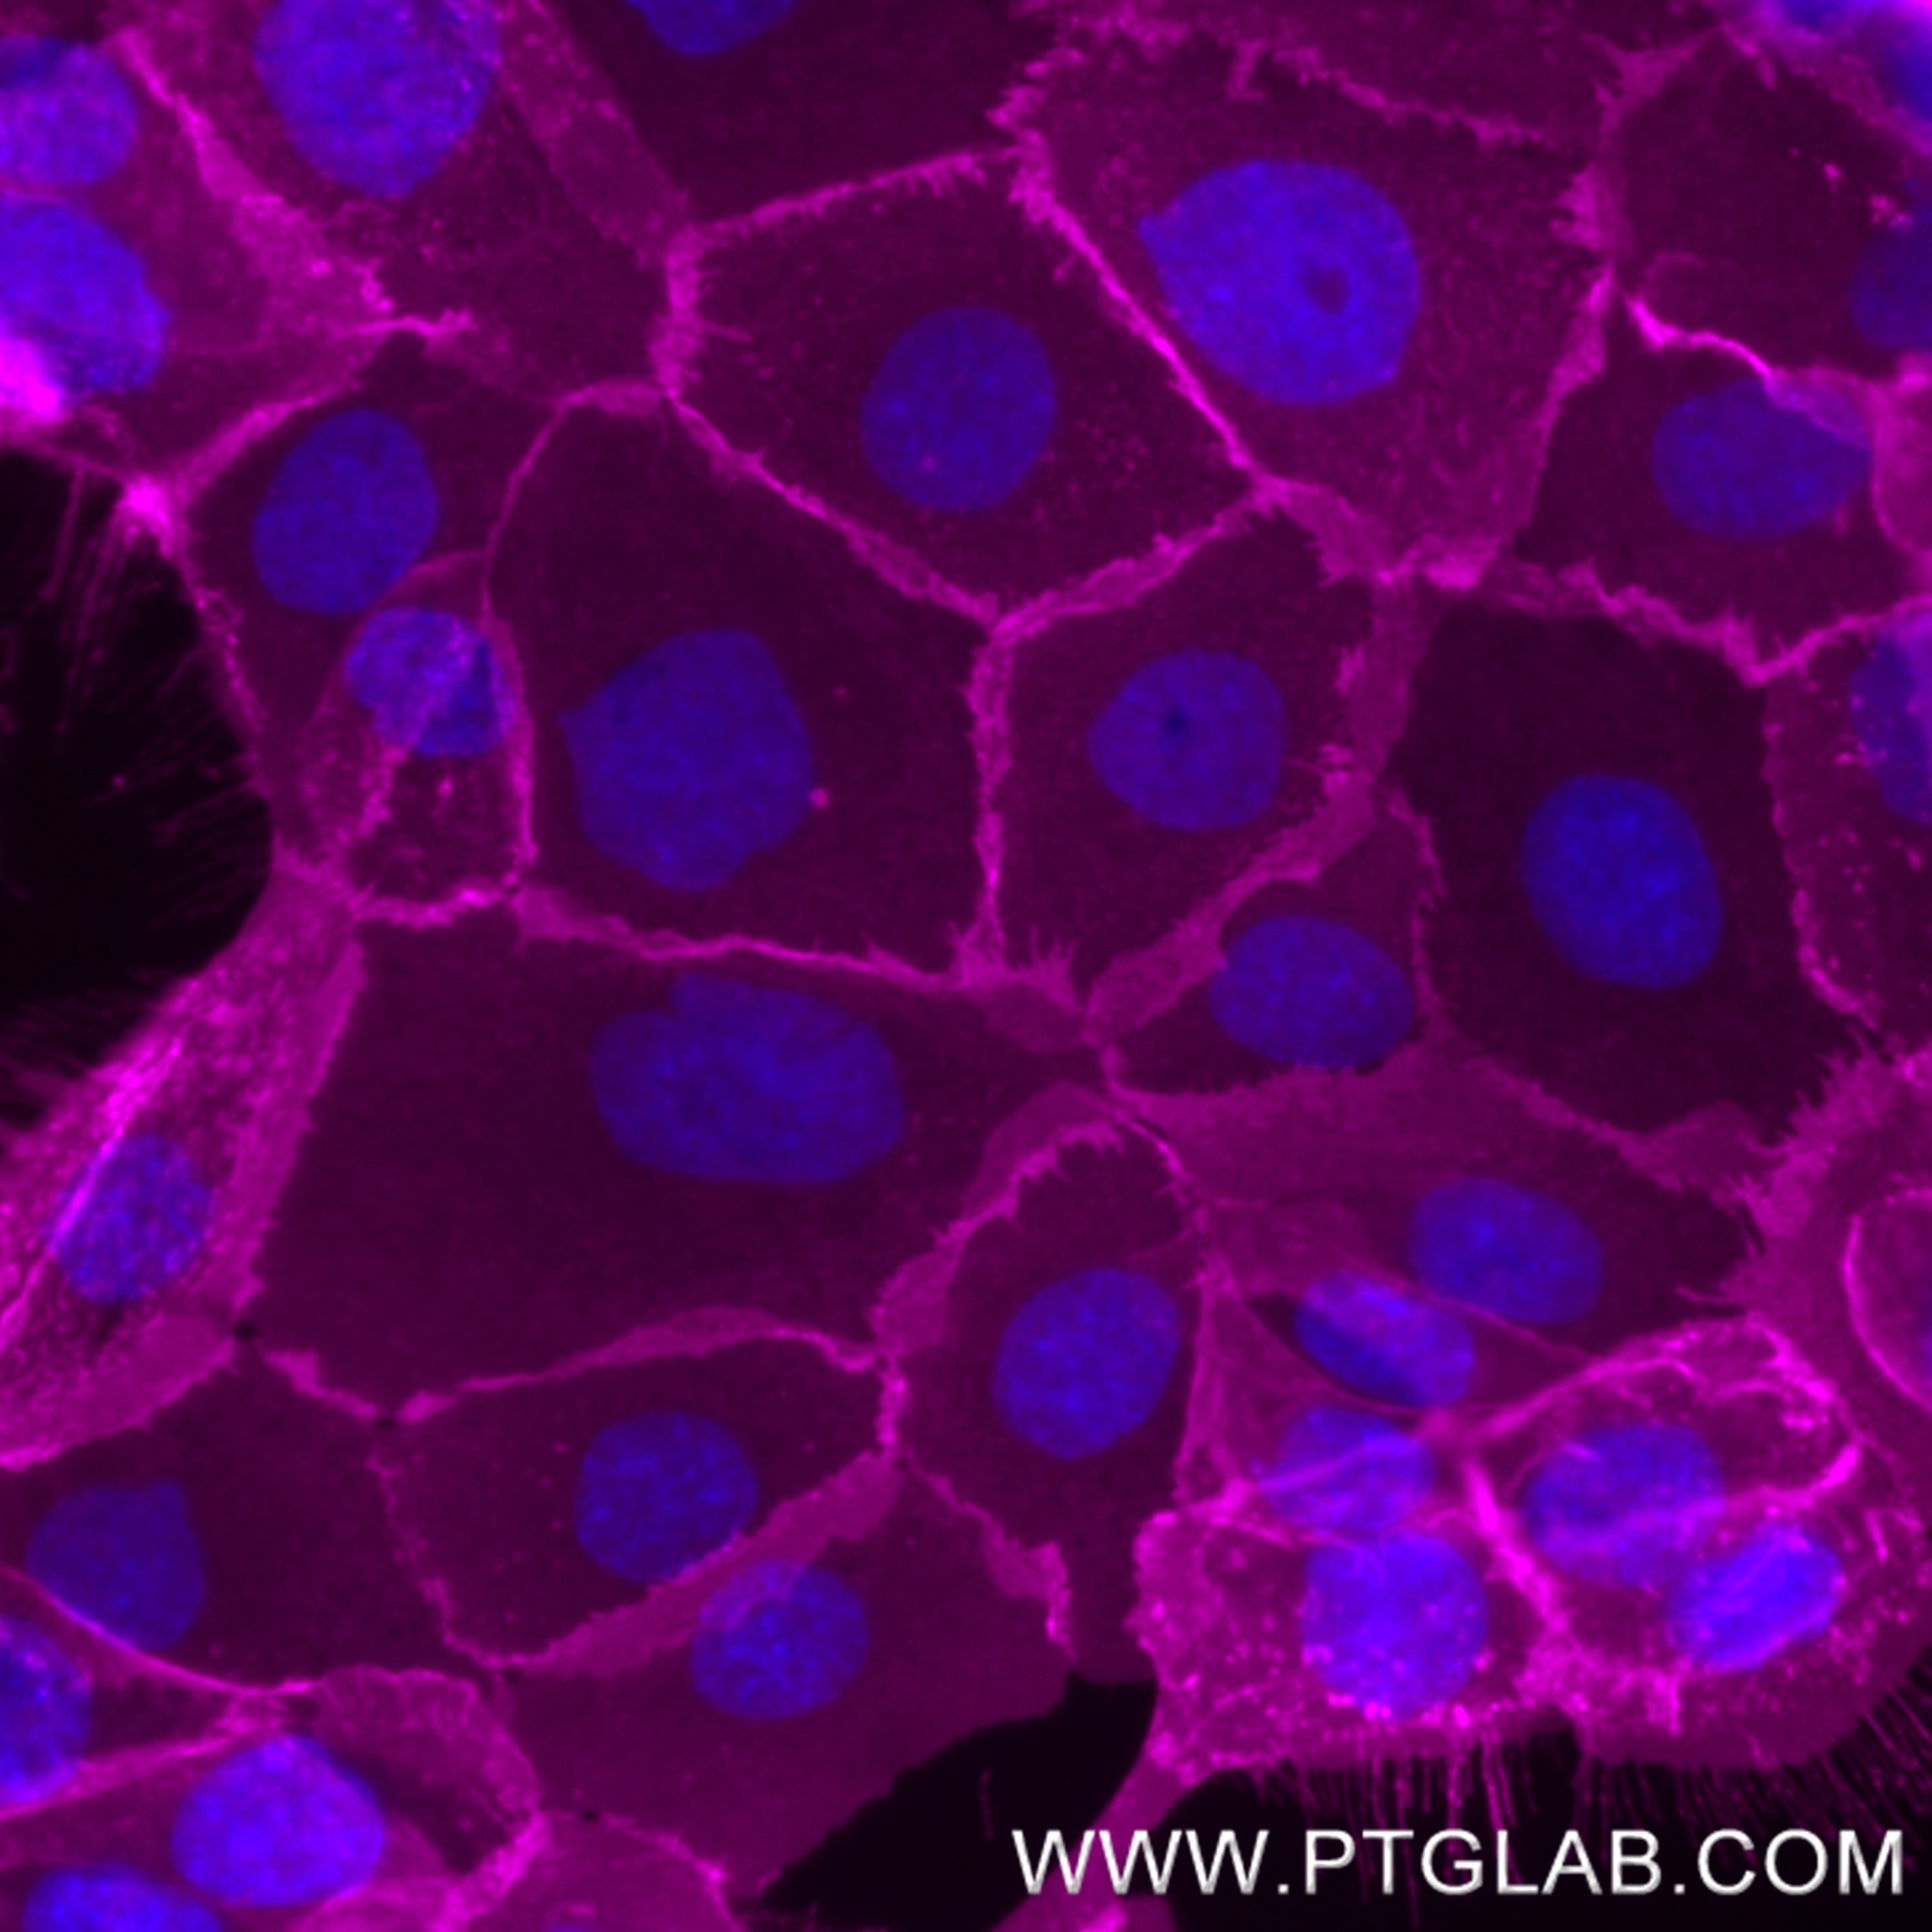 Live A431 cells were incubated with anti-human EGFR (Cetuximab biosimilar) followed by Nano-Secondary® alpaca anti-human IgG, recombinant VHH, CoraLite® Plus 647 [CTK0117] (magenta, shuGCL647-2 ). Cells were fixed and nuclei were stained with DAPI (blue). Epifluorescence images were acquired with a 40x objective and post-processed.